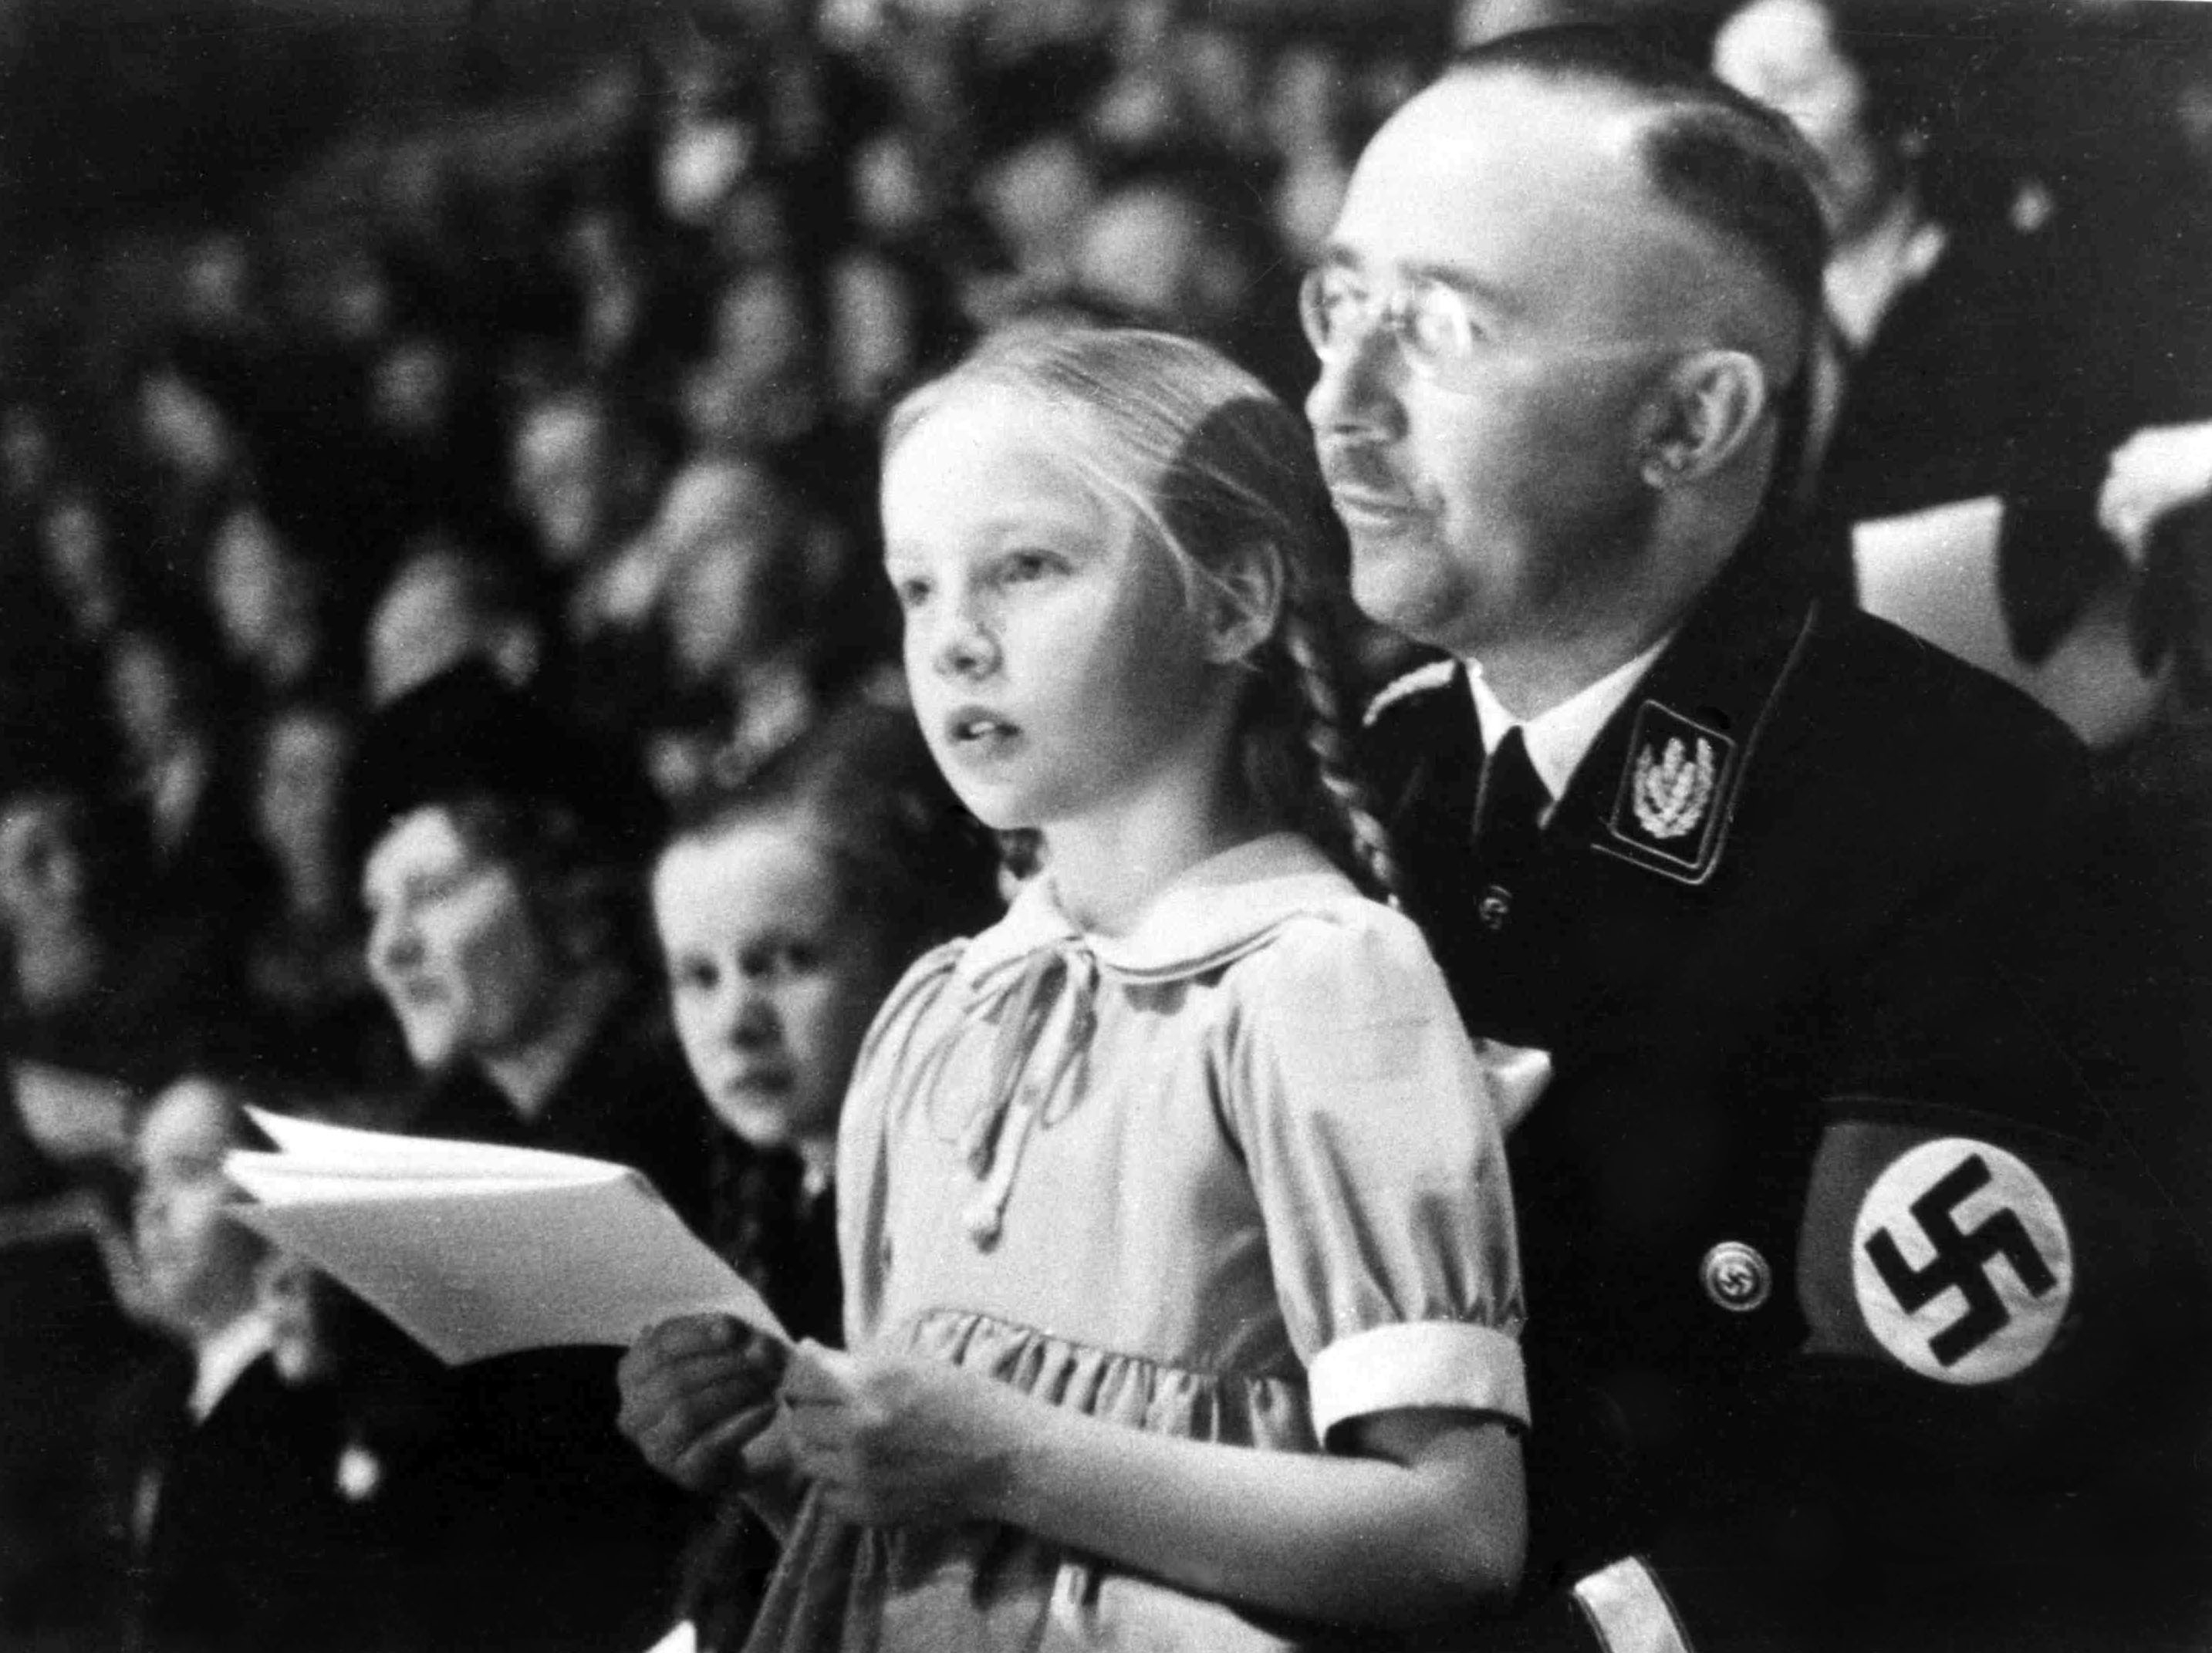 From right: Chief of the German Police and Minister of the Interior Heinrich Himmler with his daughter Gudrun on his lap watch an indoor sports display in Berlin, on March 6, 1938. (AP)